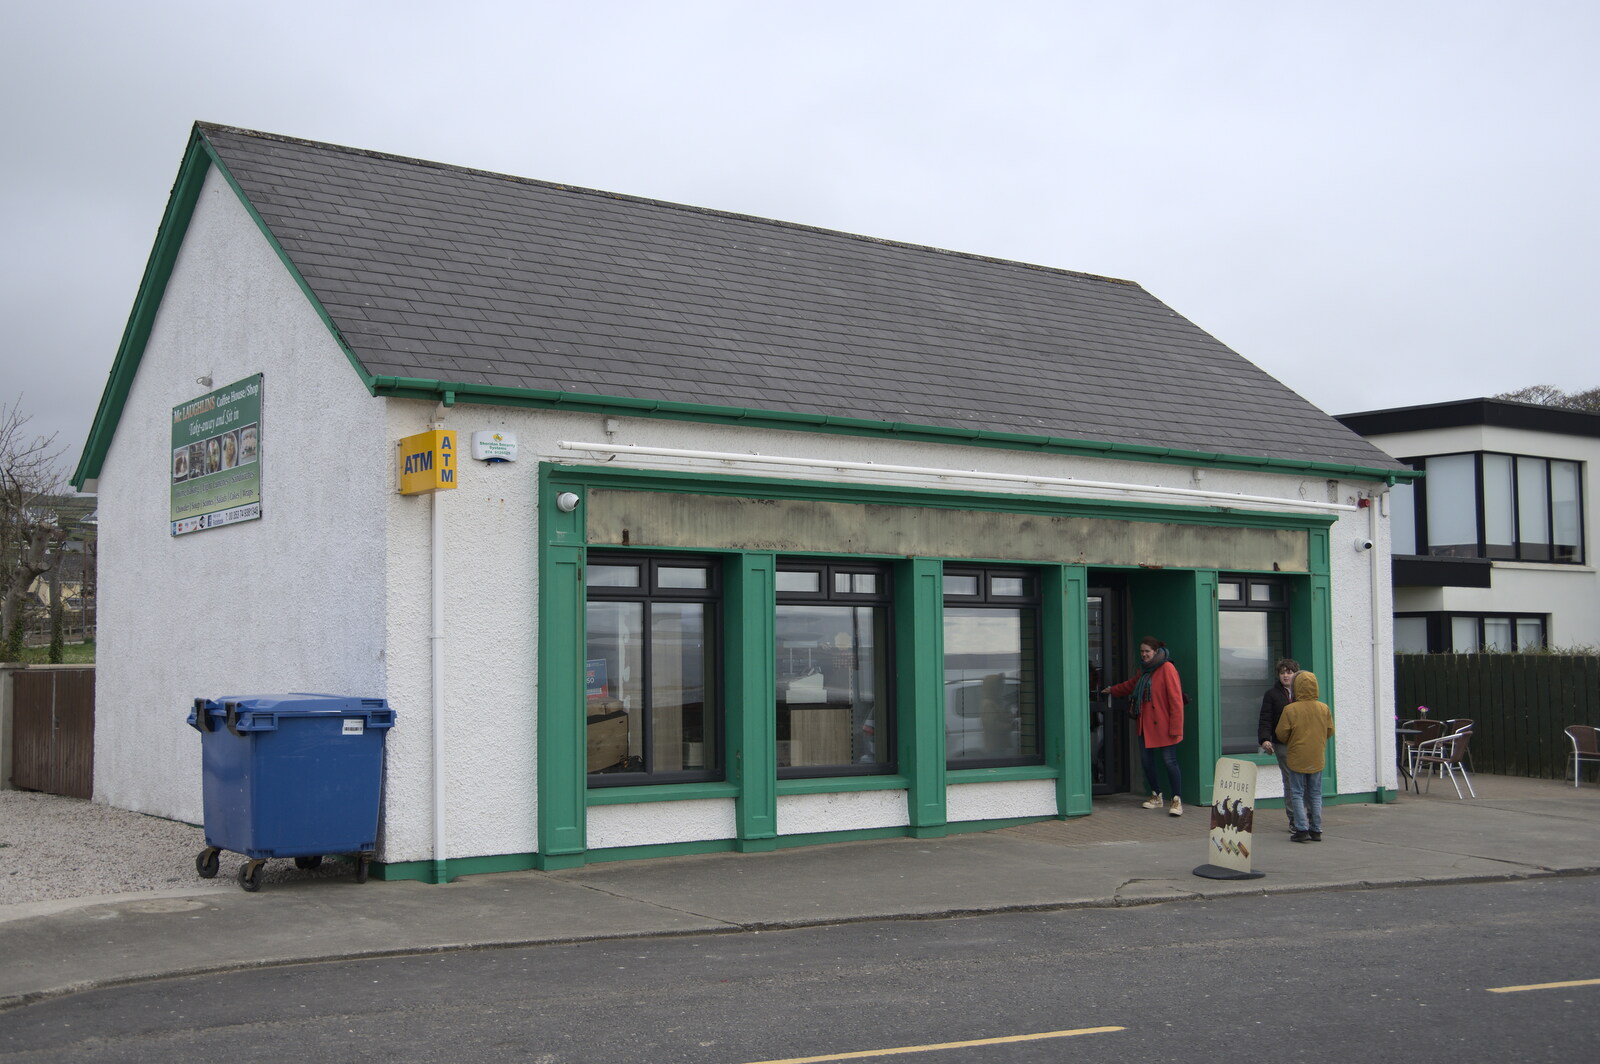 Greencastle, Doagh and Malin Head, County Donegal, Ireland - 19th April 2022: The shop next door